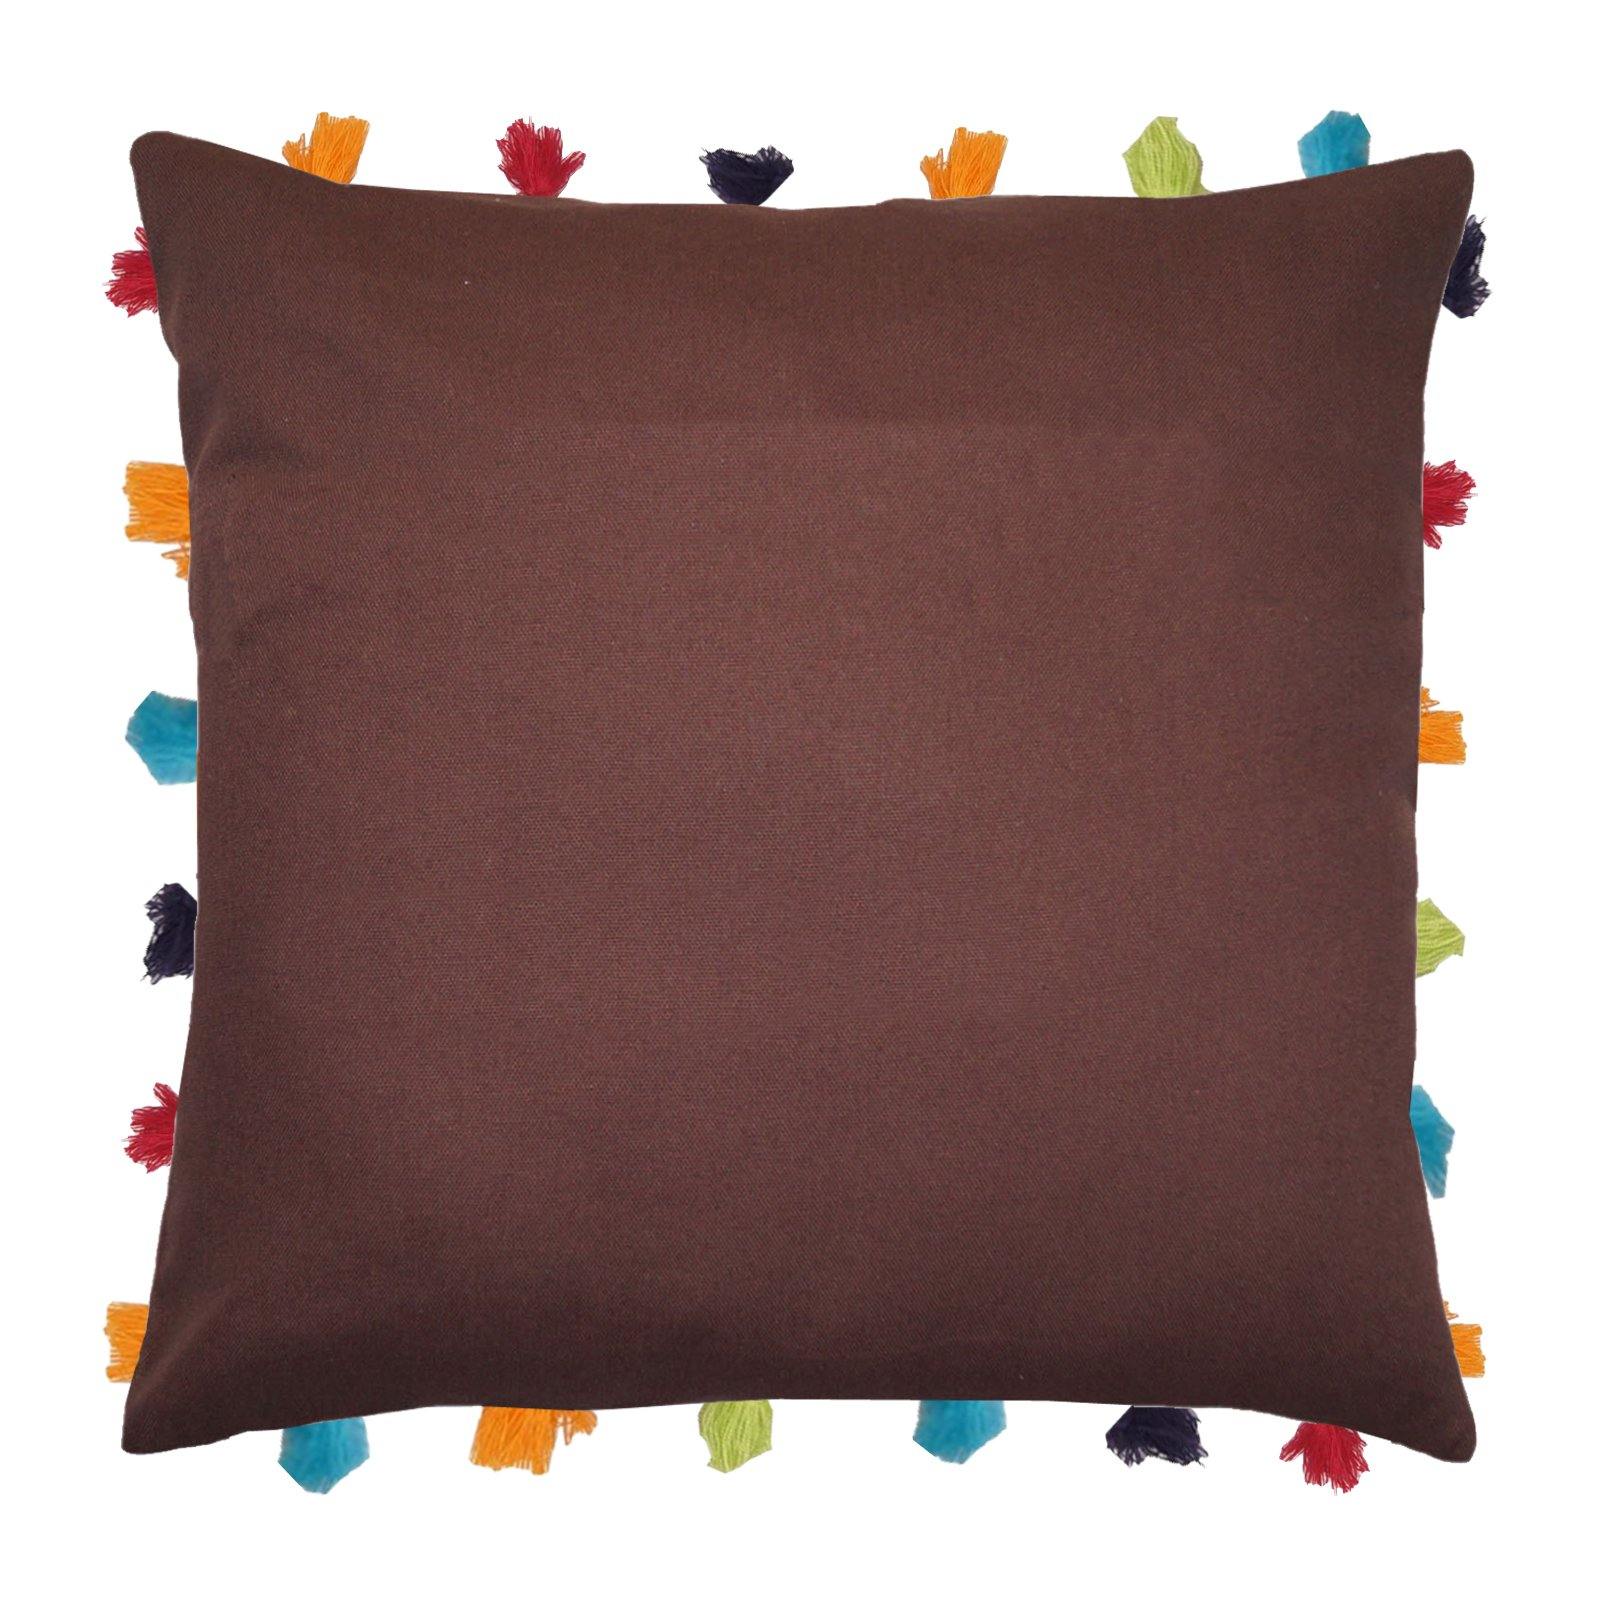 Lushomes French Roast Cushion Cover with Colorful tassels (Single pc, 18 x 18”) - Lushomes